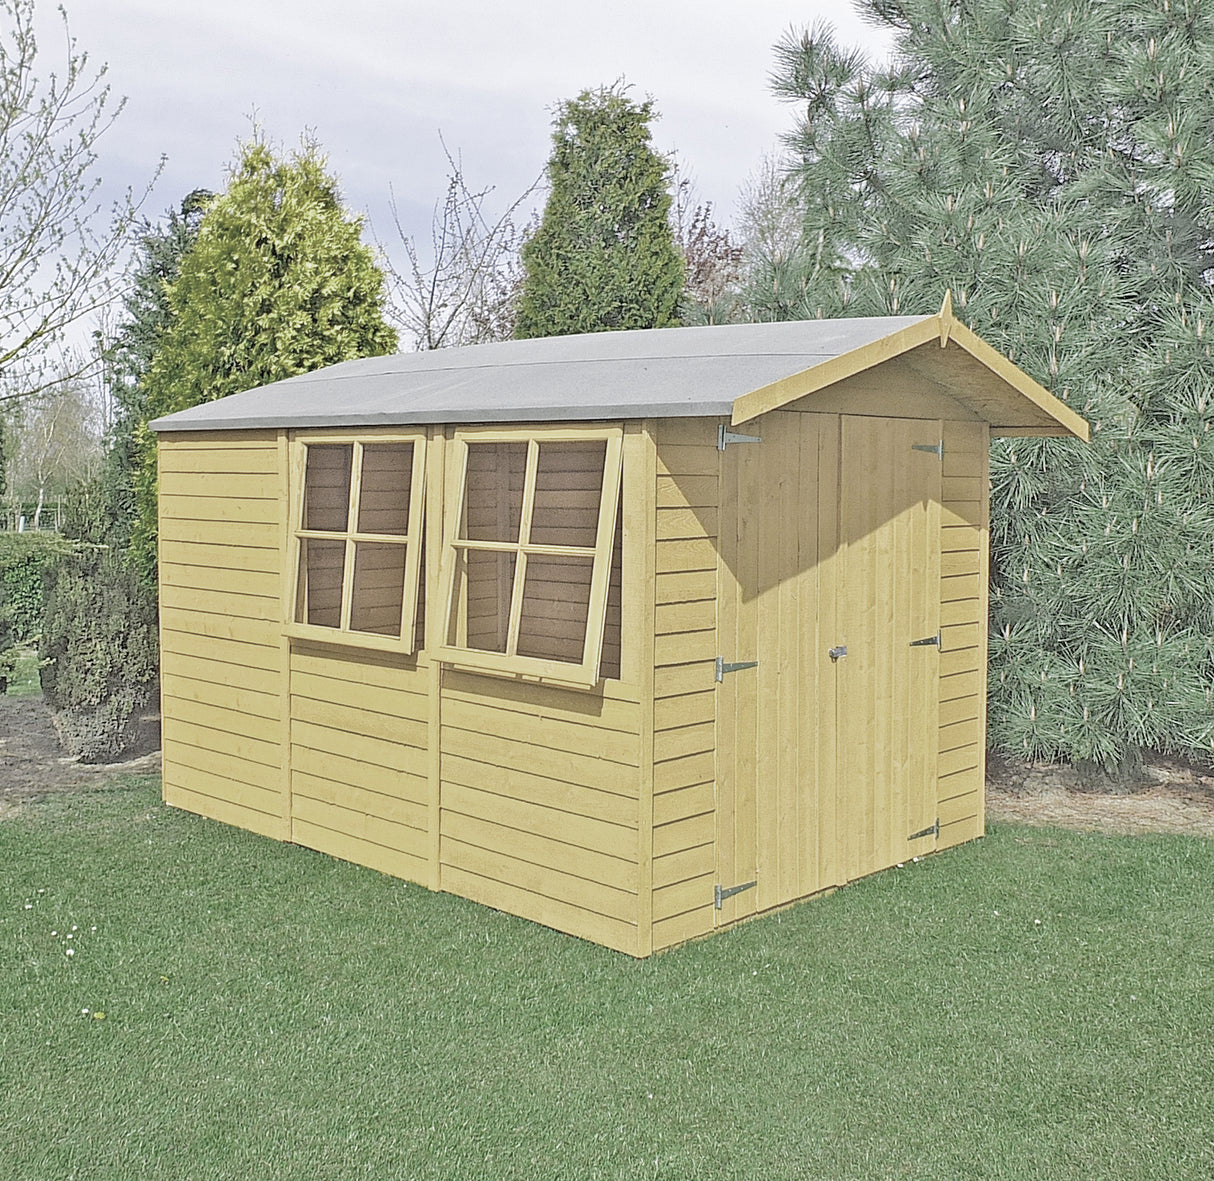 Shire Overlap Pressure Treated Shed 10x7